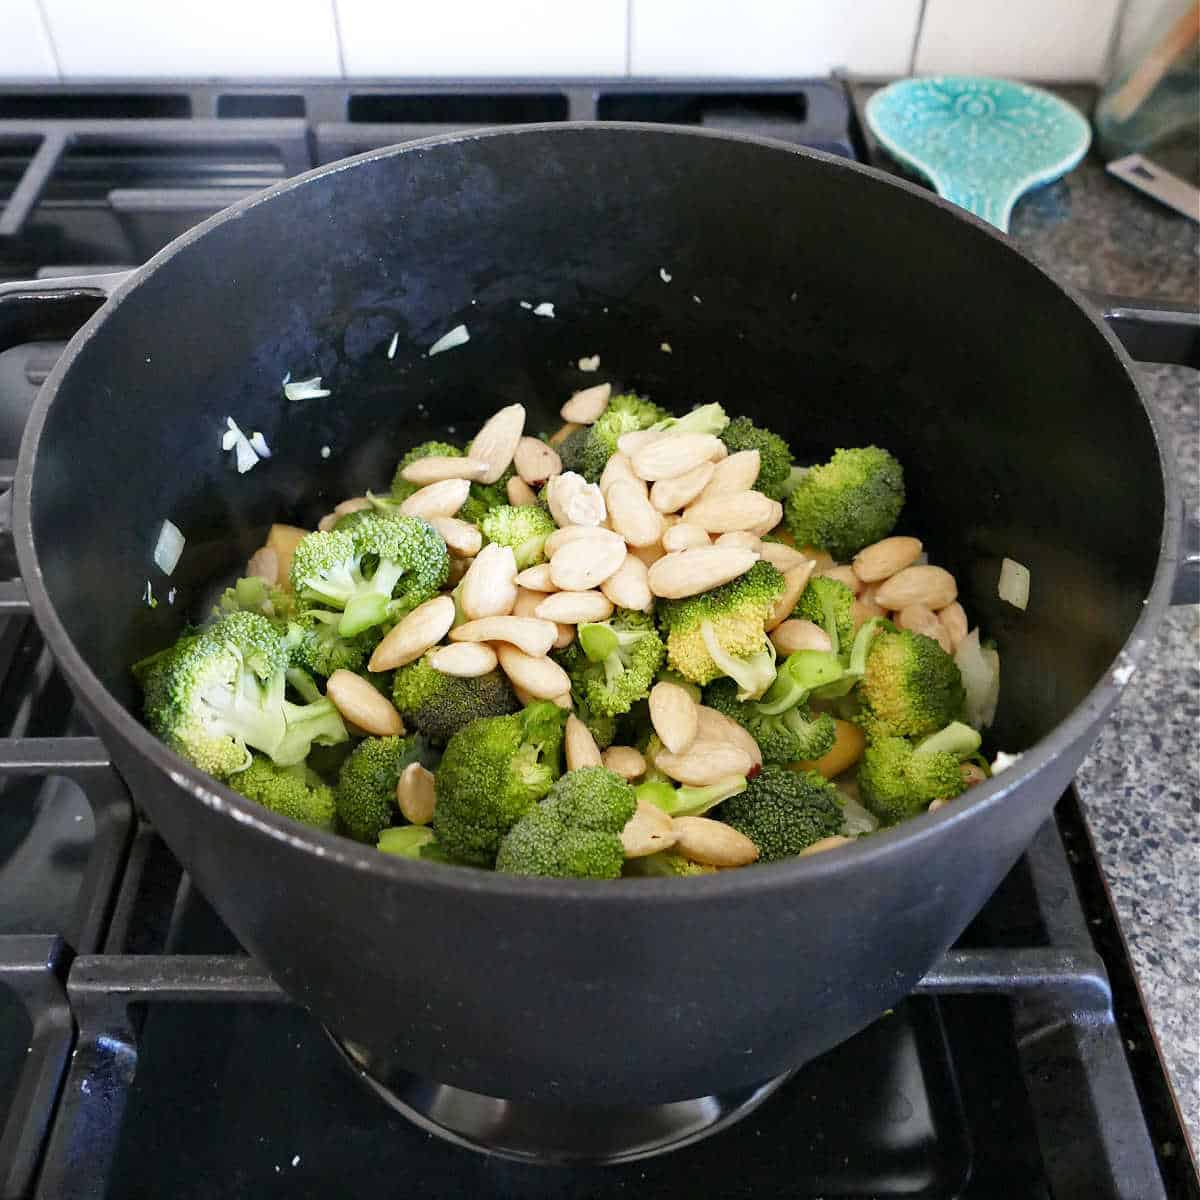 onion, garlic, broccoli, and blanched almonds in a soup pot